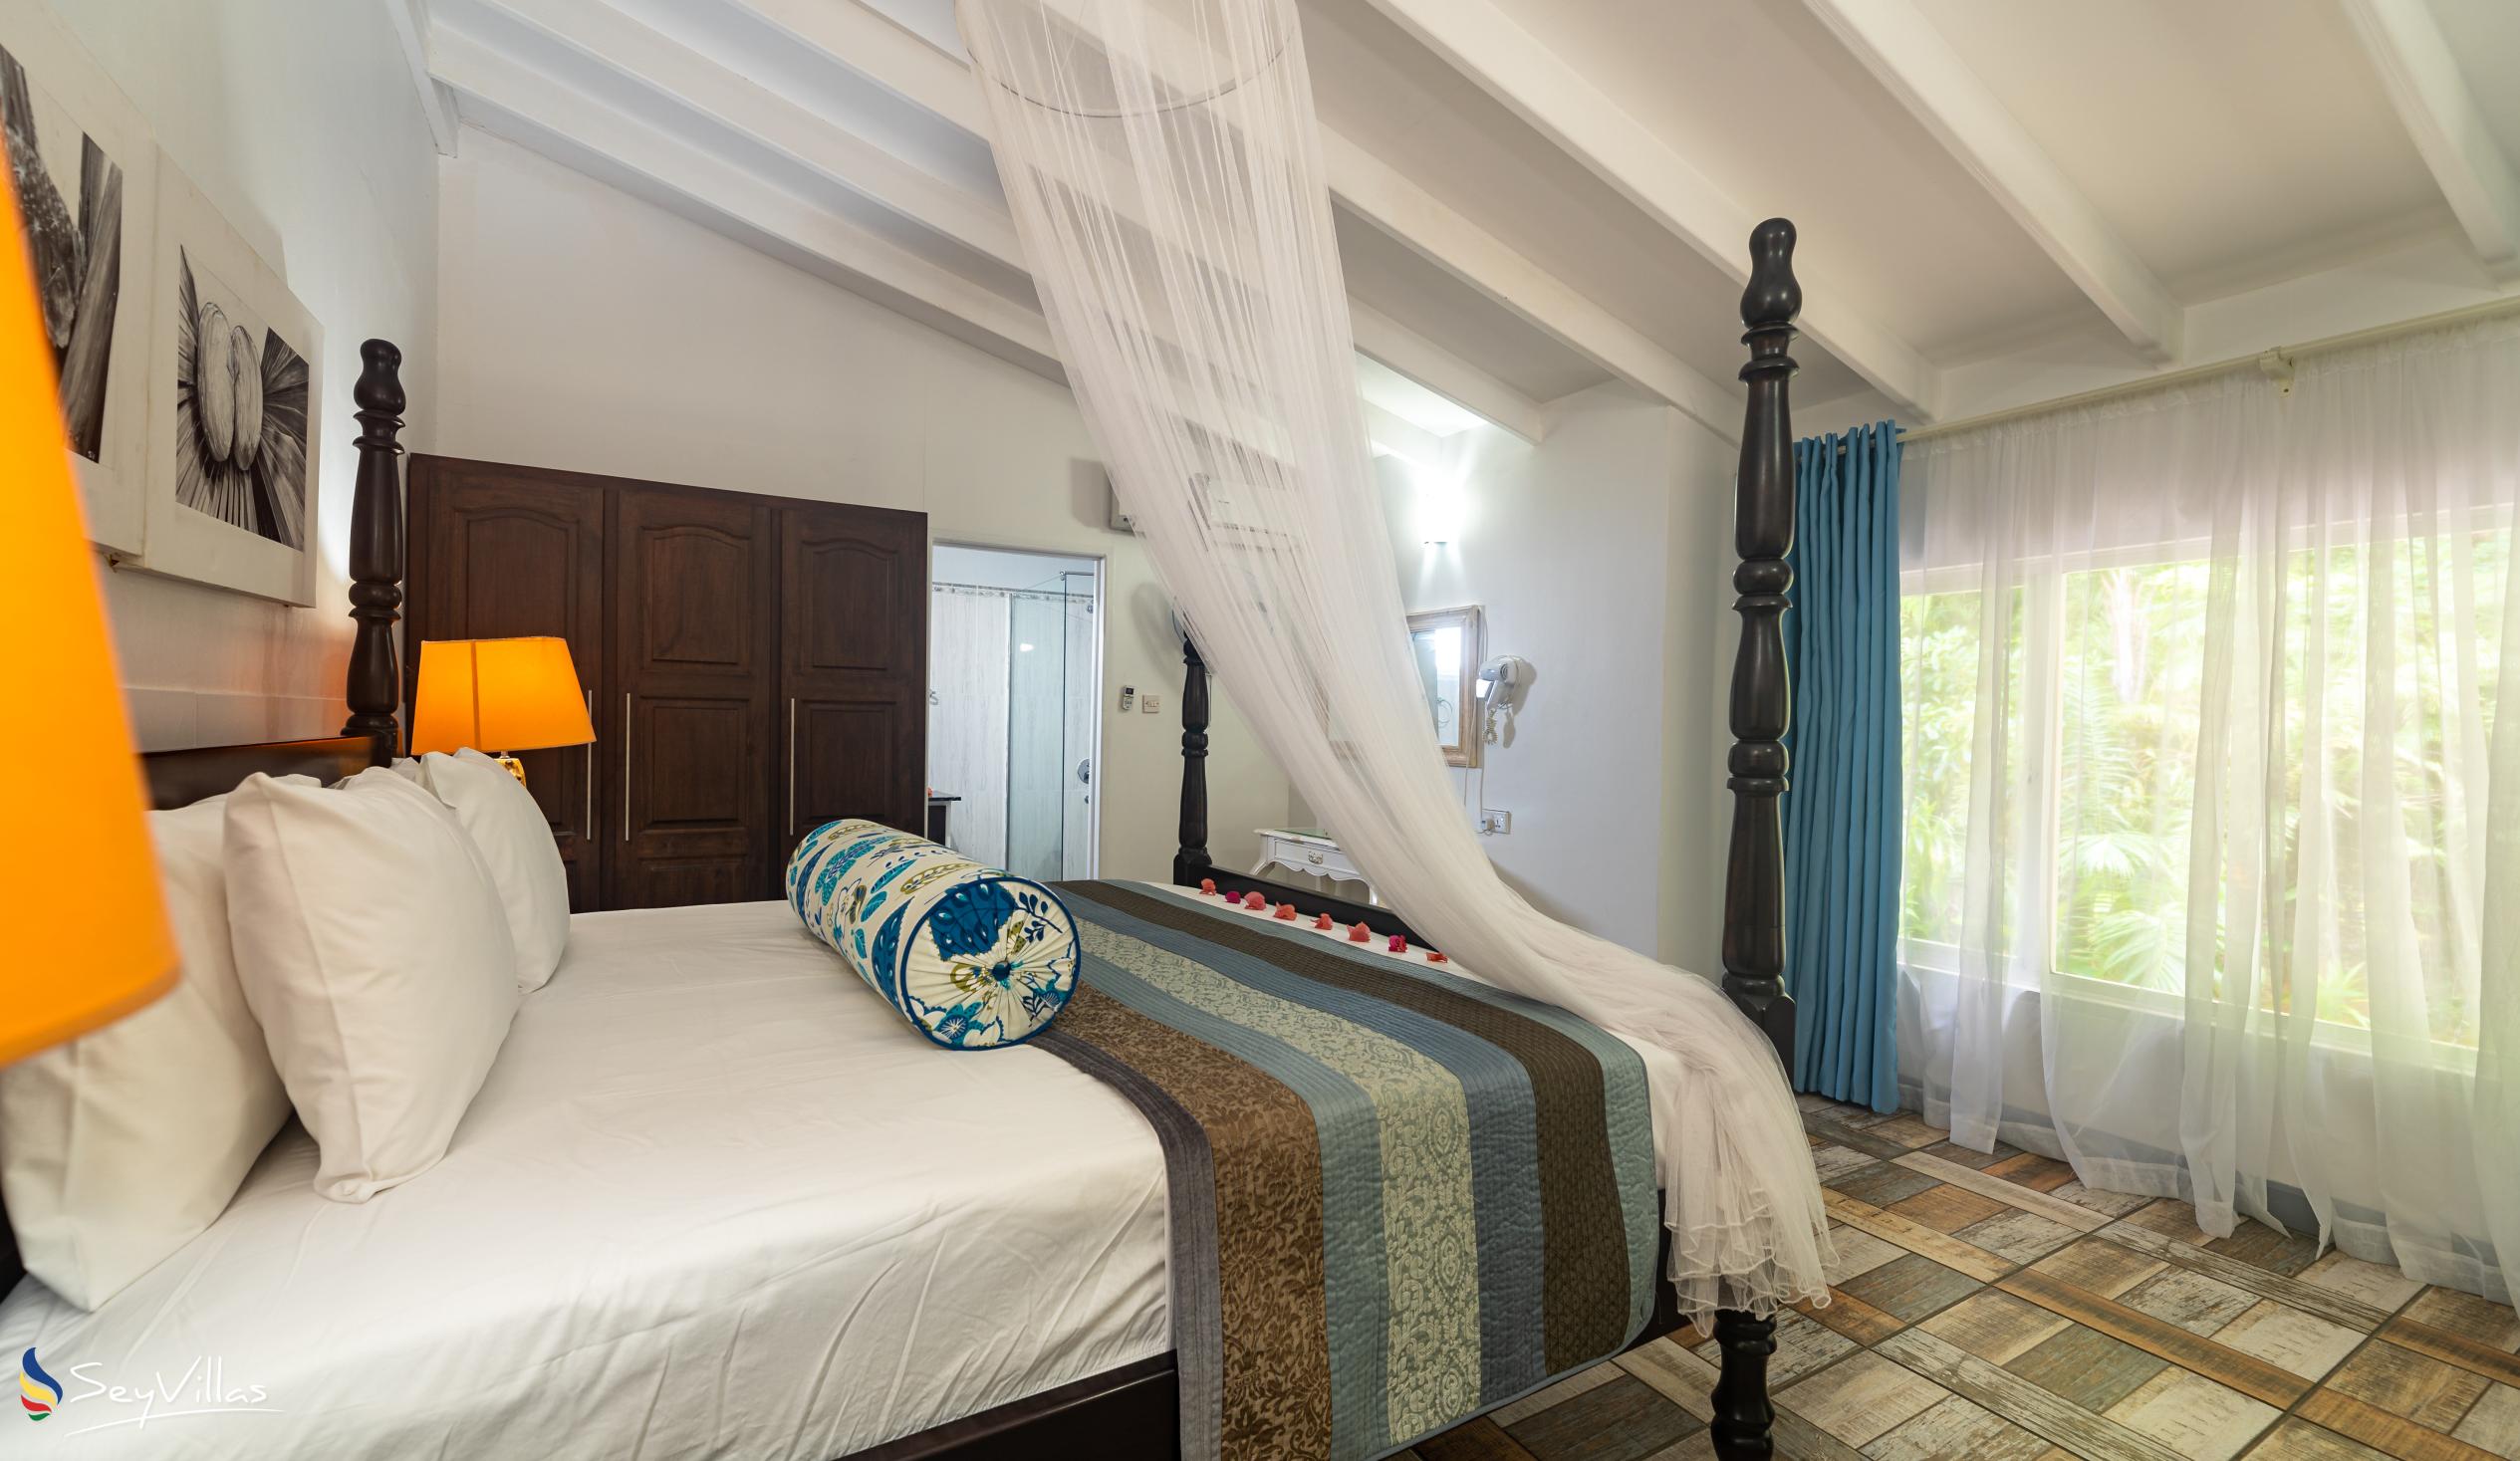 Foto 47: Stephna Residence - Appartement Spacieux - Mahé (Seychelles)